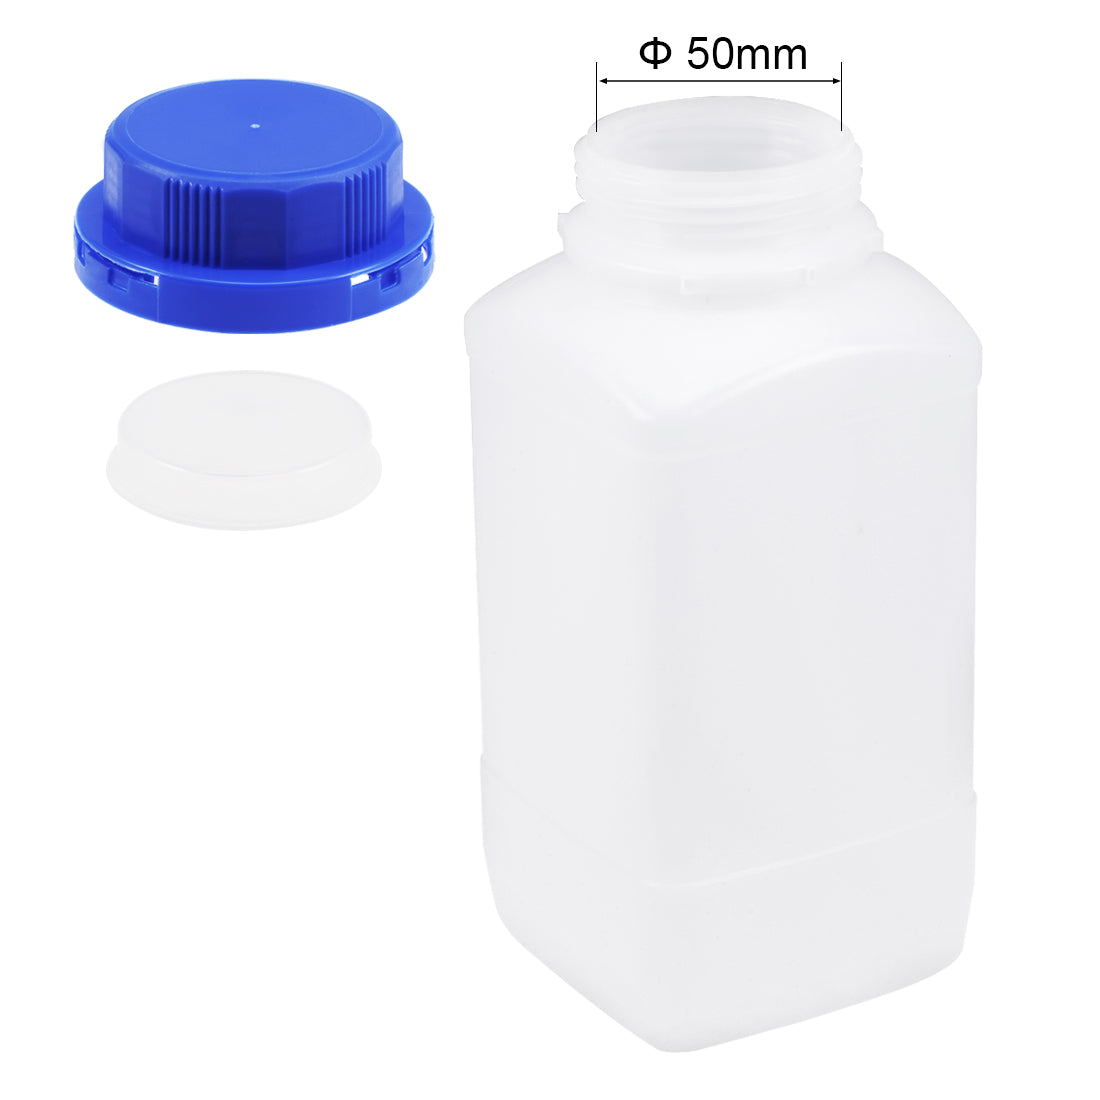 uxcell Uxcell Plastic Lab Chemical Reagent Bottle 1000ml/34oz Wide Mouth Sample Sealing Liquid Storage Container Blue